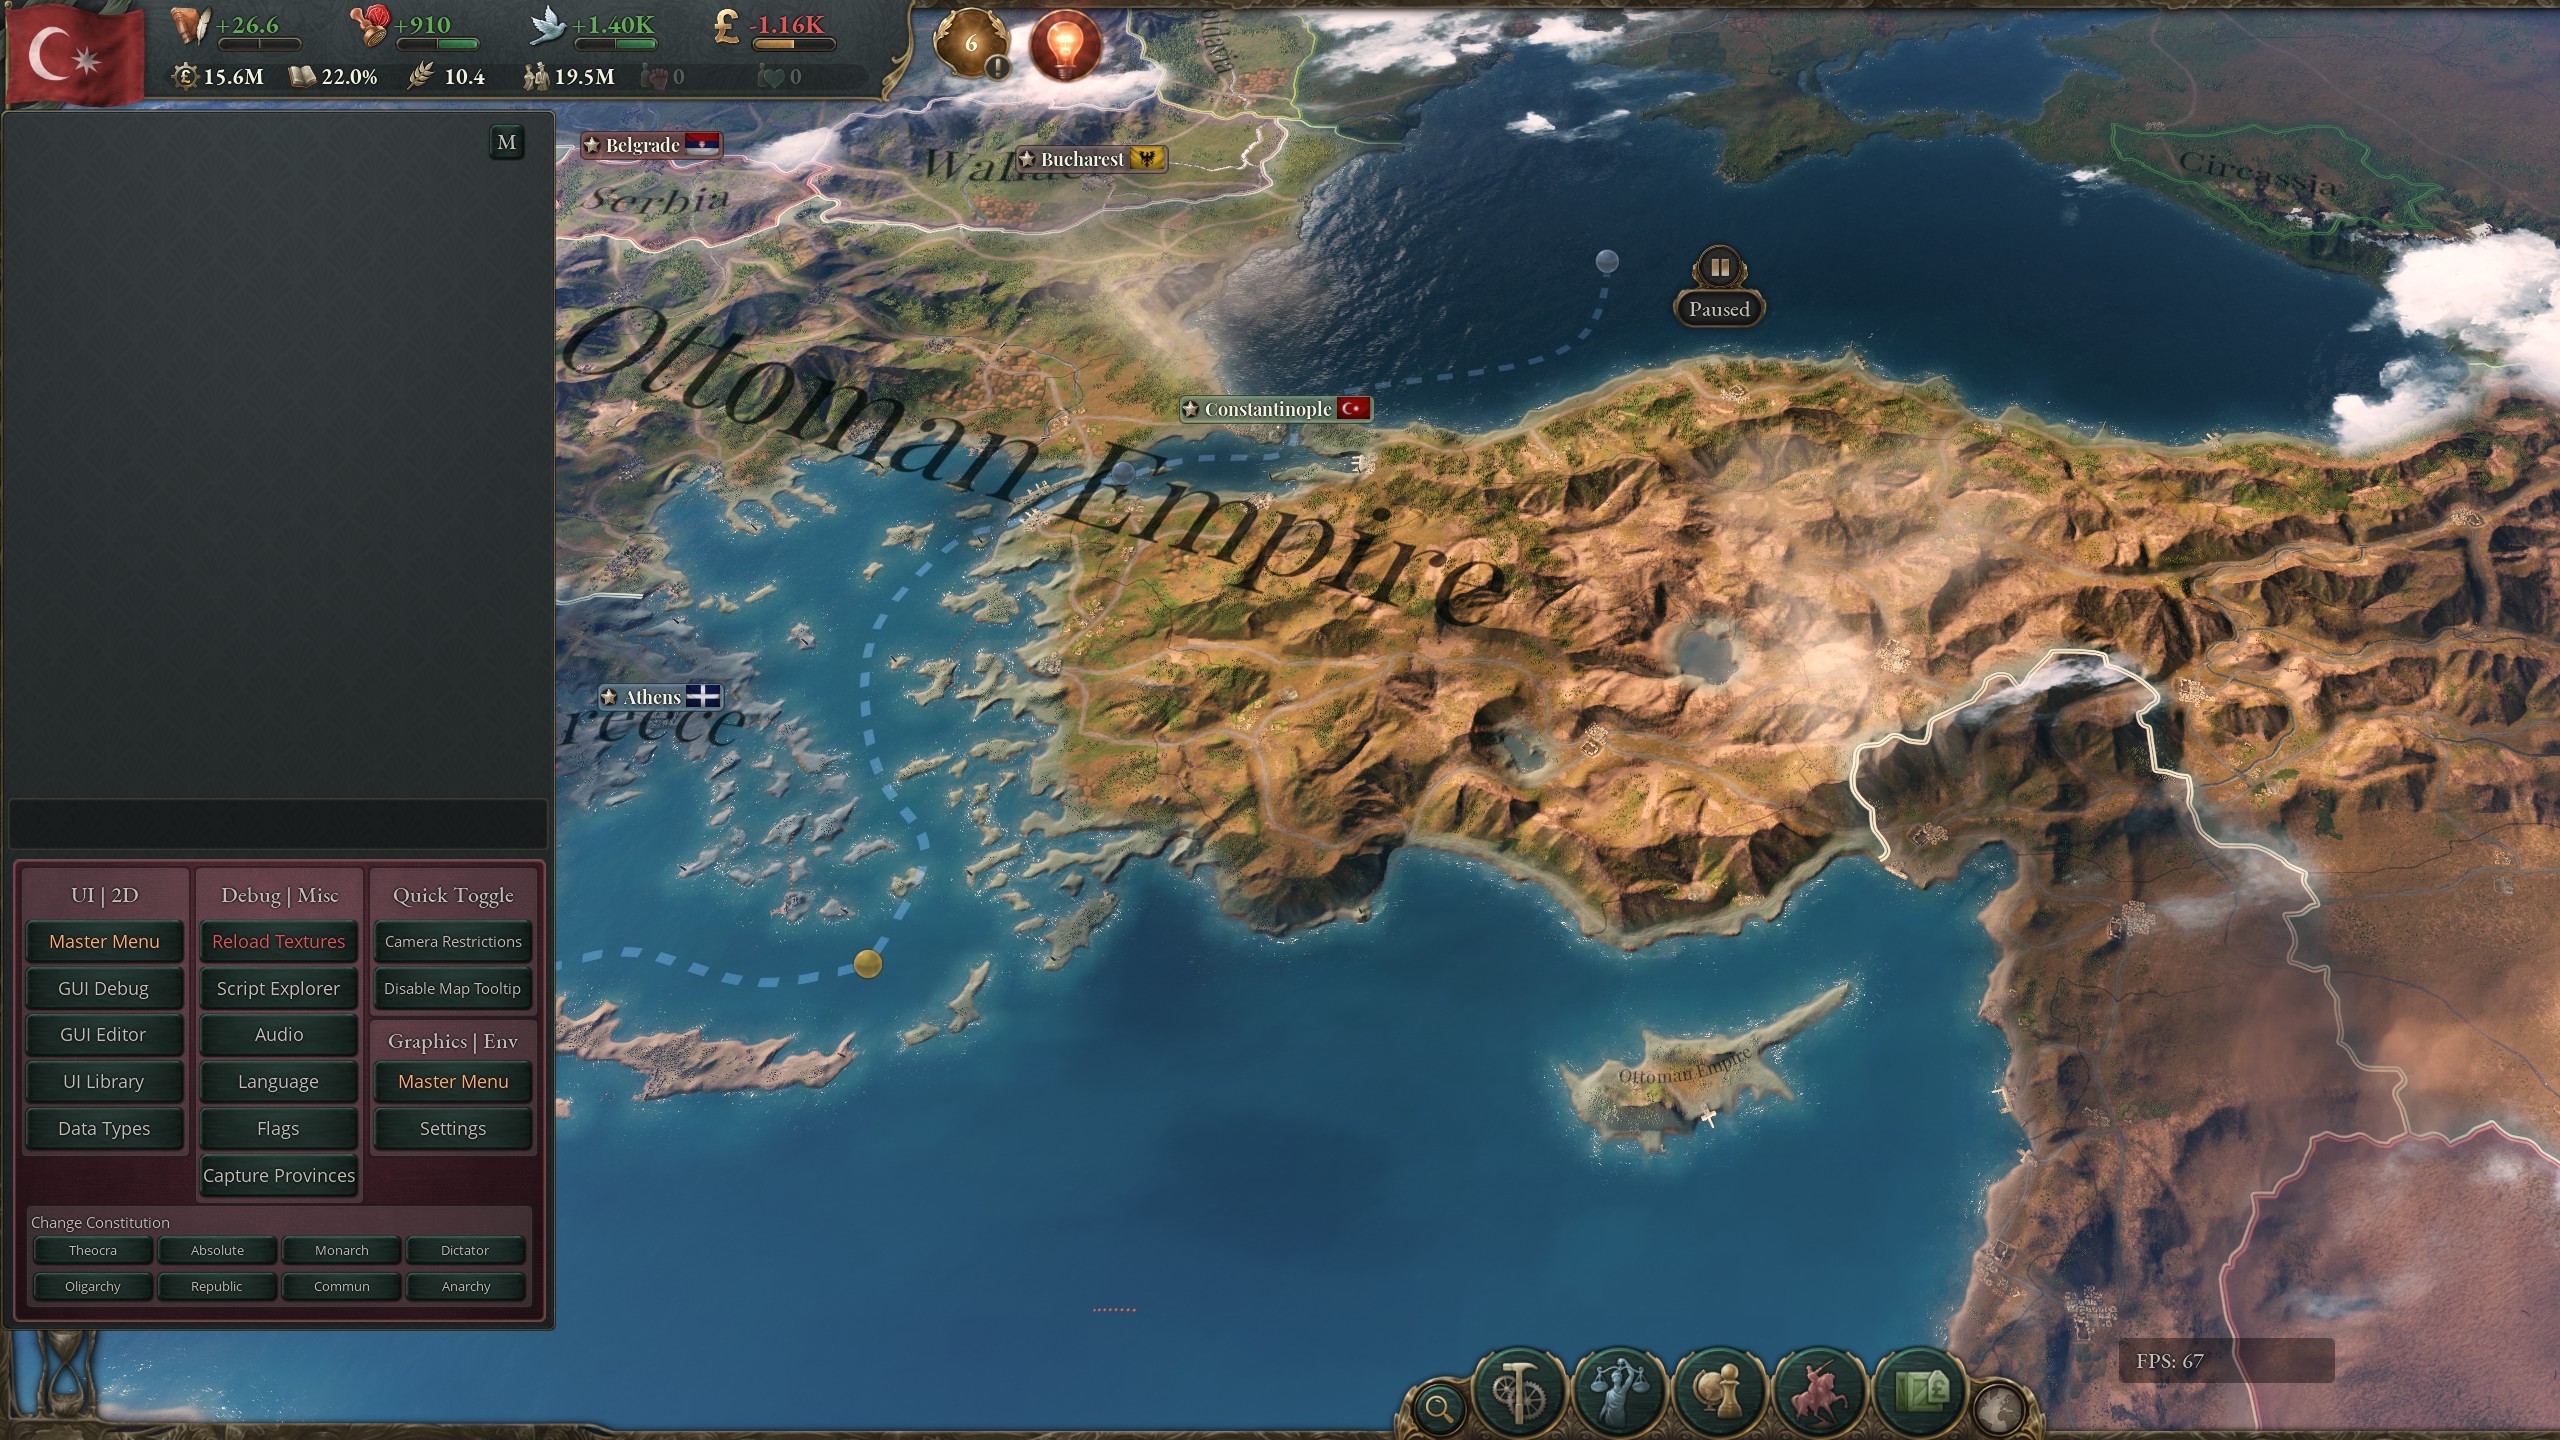 Victoria 3 cheats and console commands: The Victoria 3 debug menu is shown on the left-hand side of the main screen